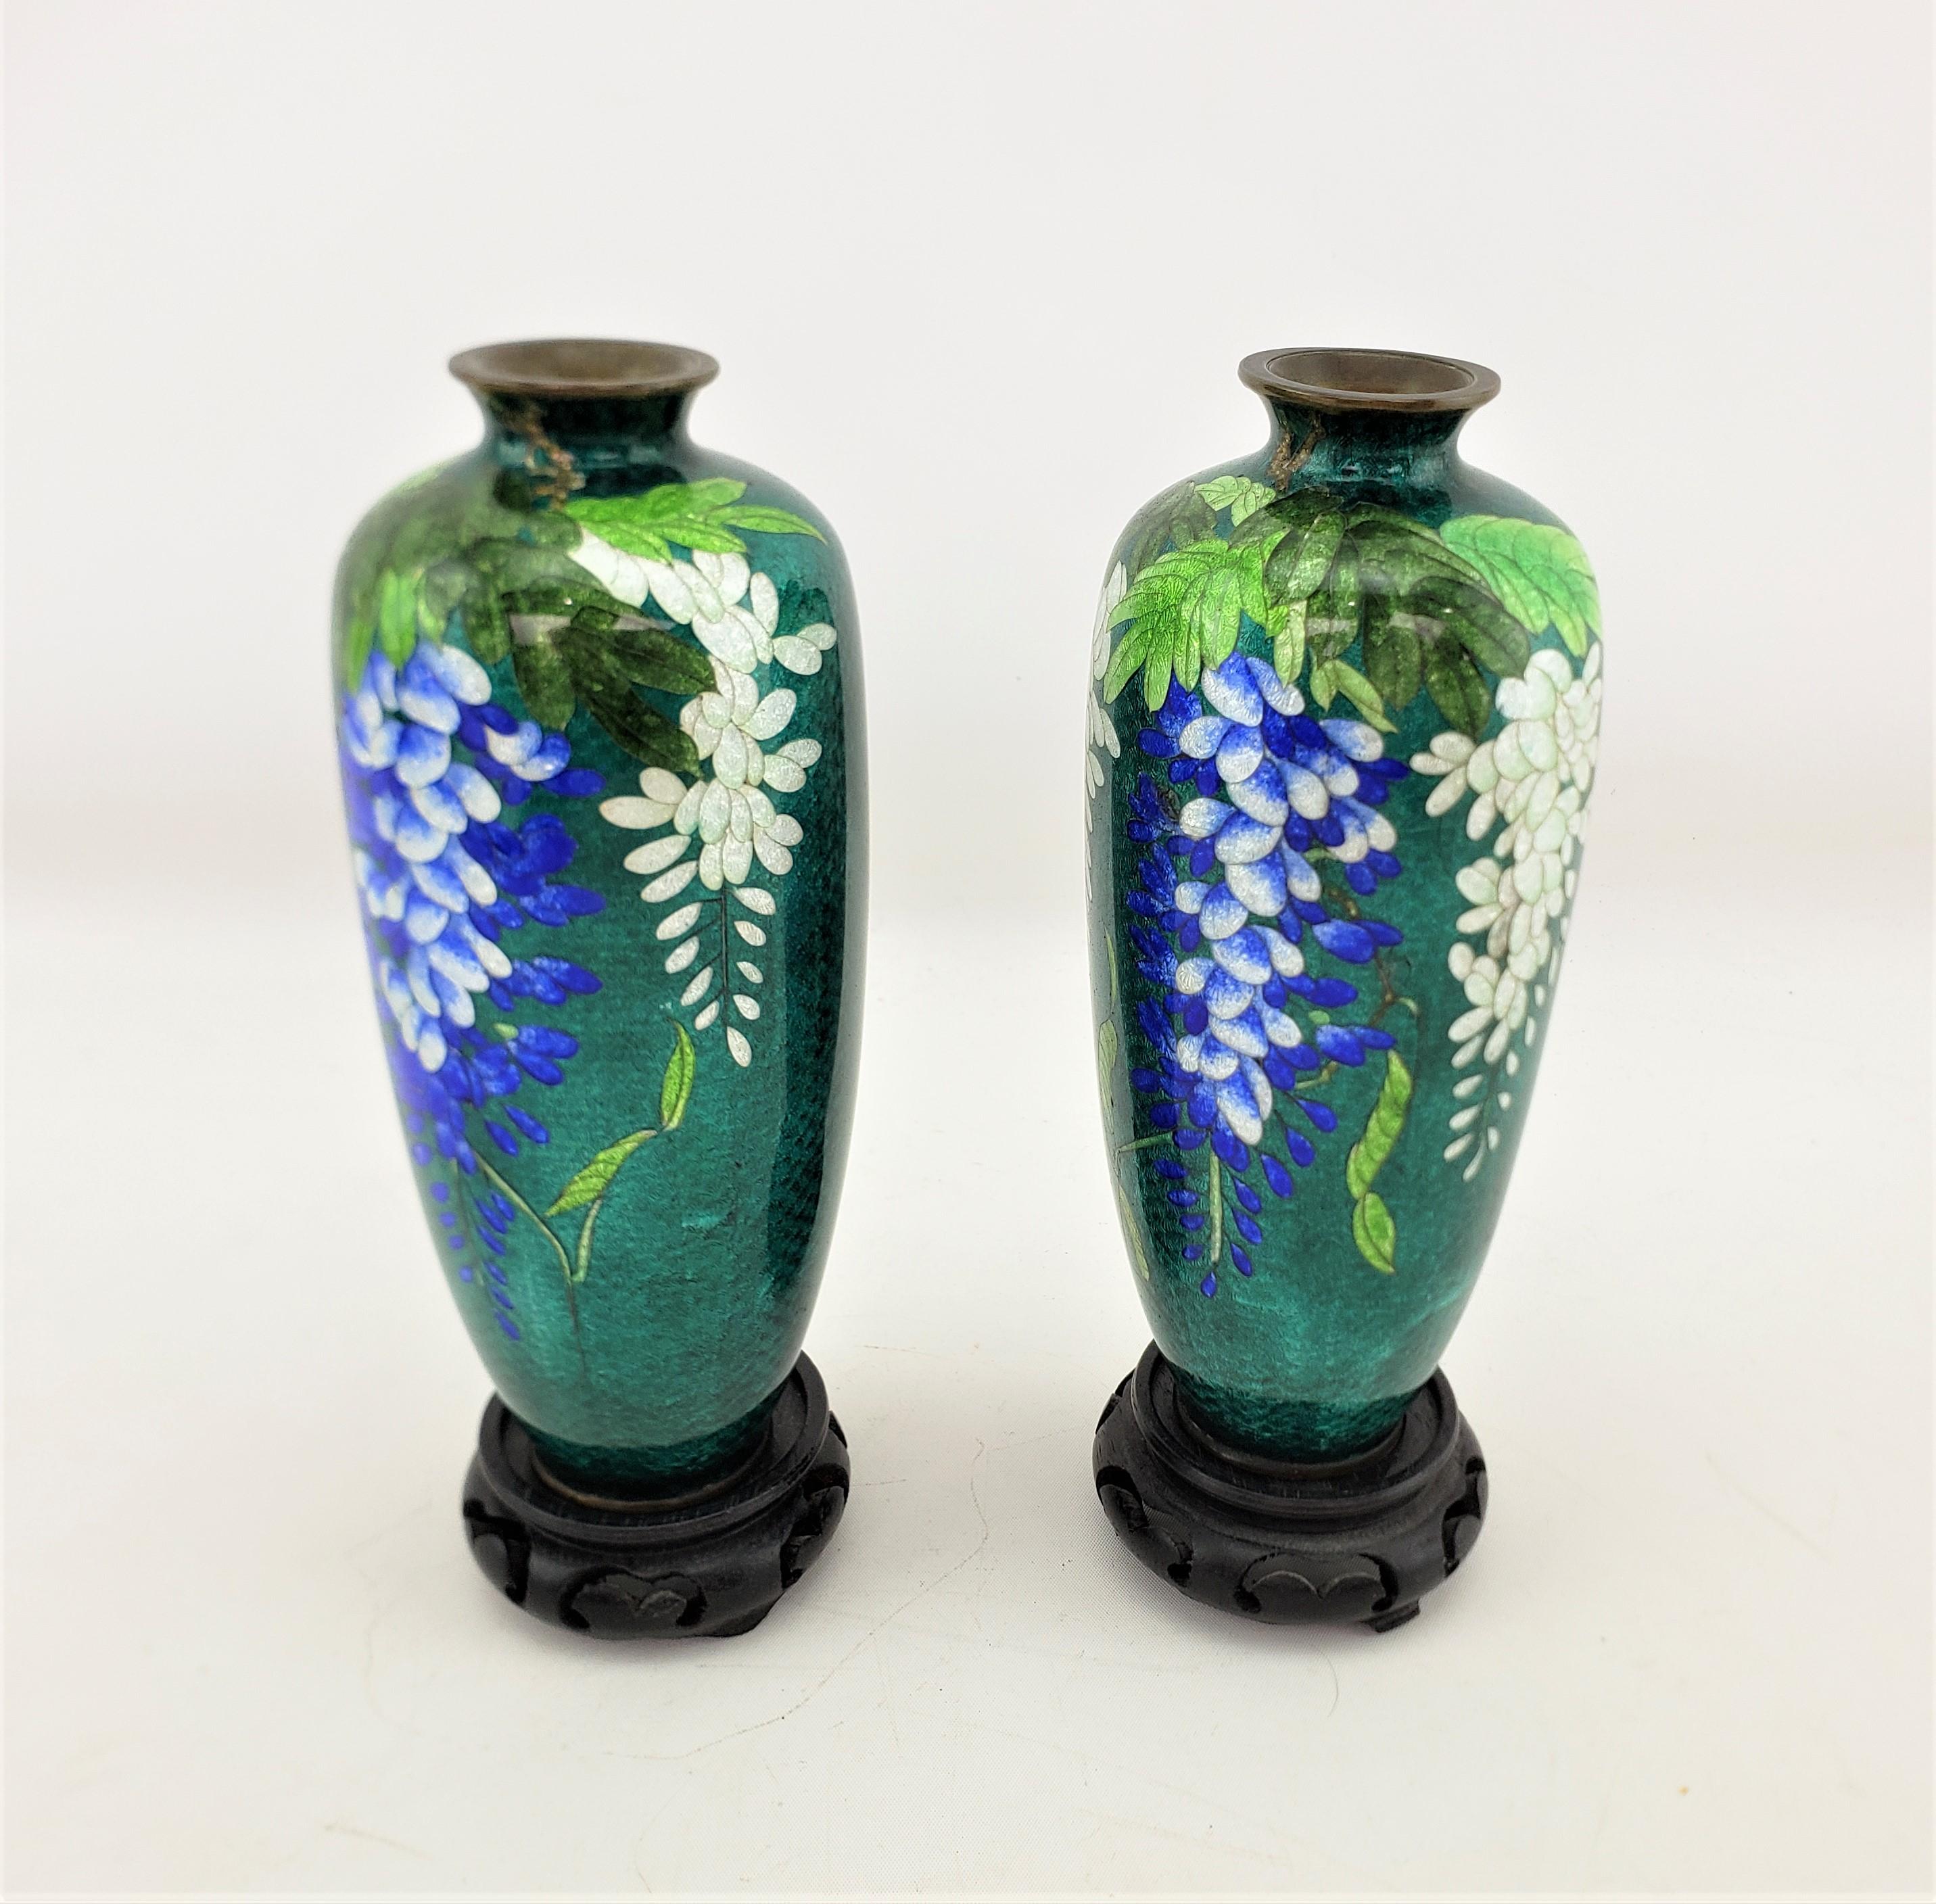 Enameled Pair of Antique Japanese Cloisonne Vases with Floral Decoration & Wooden Stands For Sale